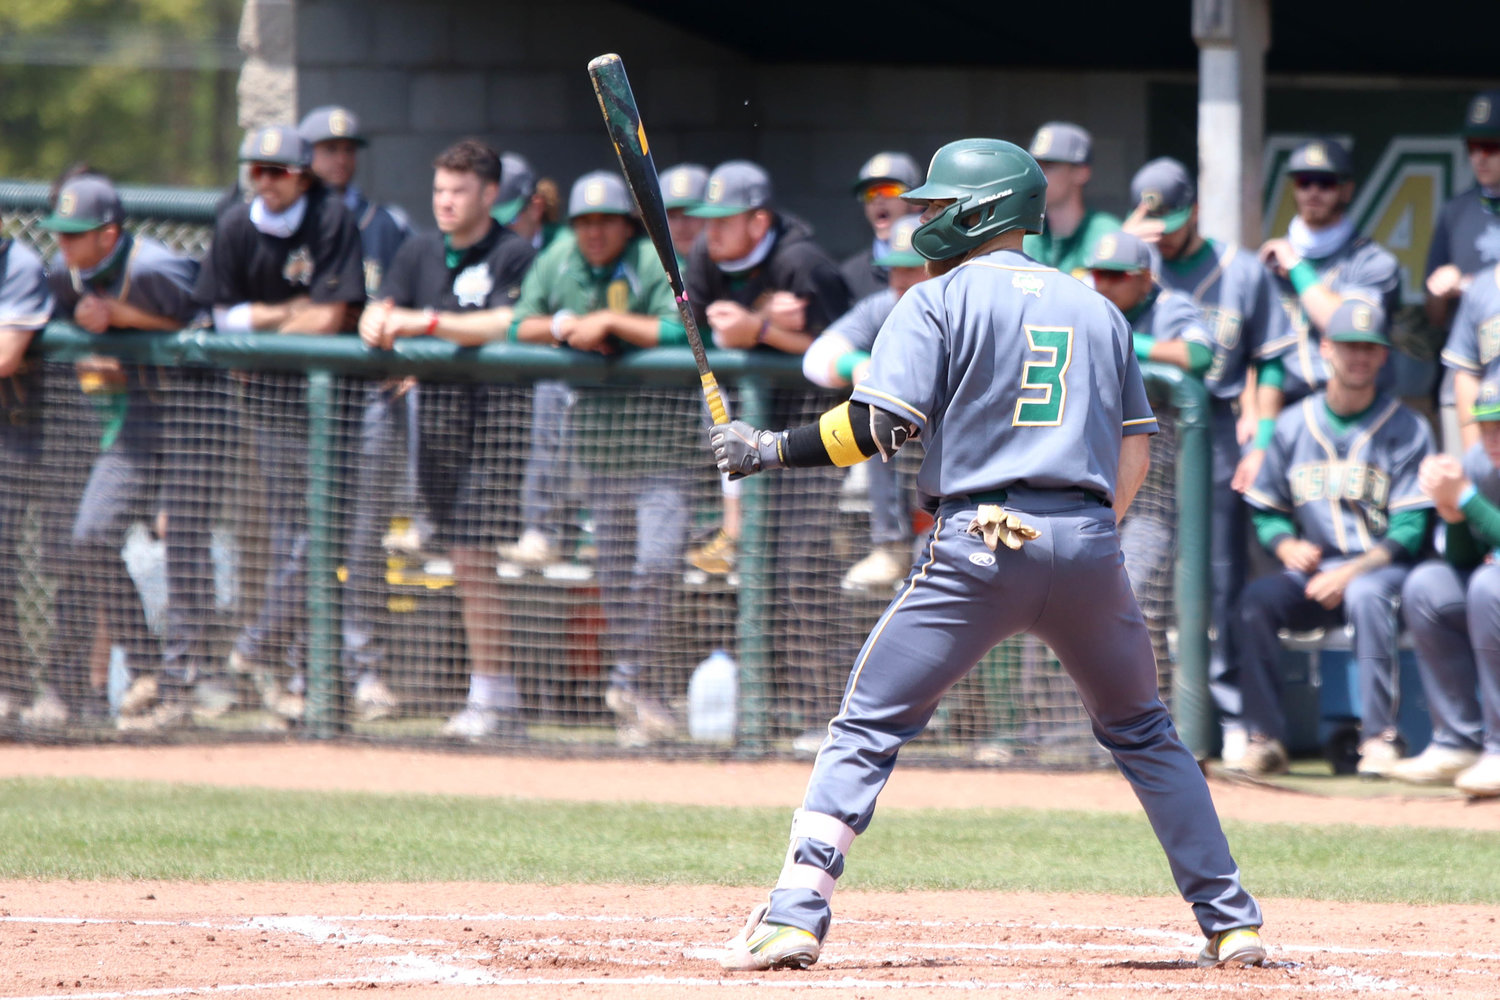 SETTING THE TABLE — Ryan Enos of SUNY Oswego, who played his high school baseball for Oriskany, is piling up eye-popping offensive stats to start his final season for the Lakers. With the team at 10-3 to start the campaign, Enos is batting .558 and slugging 1.019. He leads the team with seven doubles, five home runs, 22 RBIs and 11 stolen bases in 12 attempts.